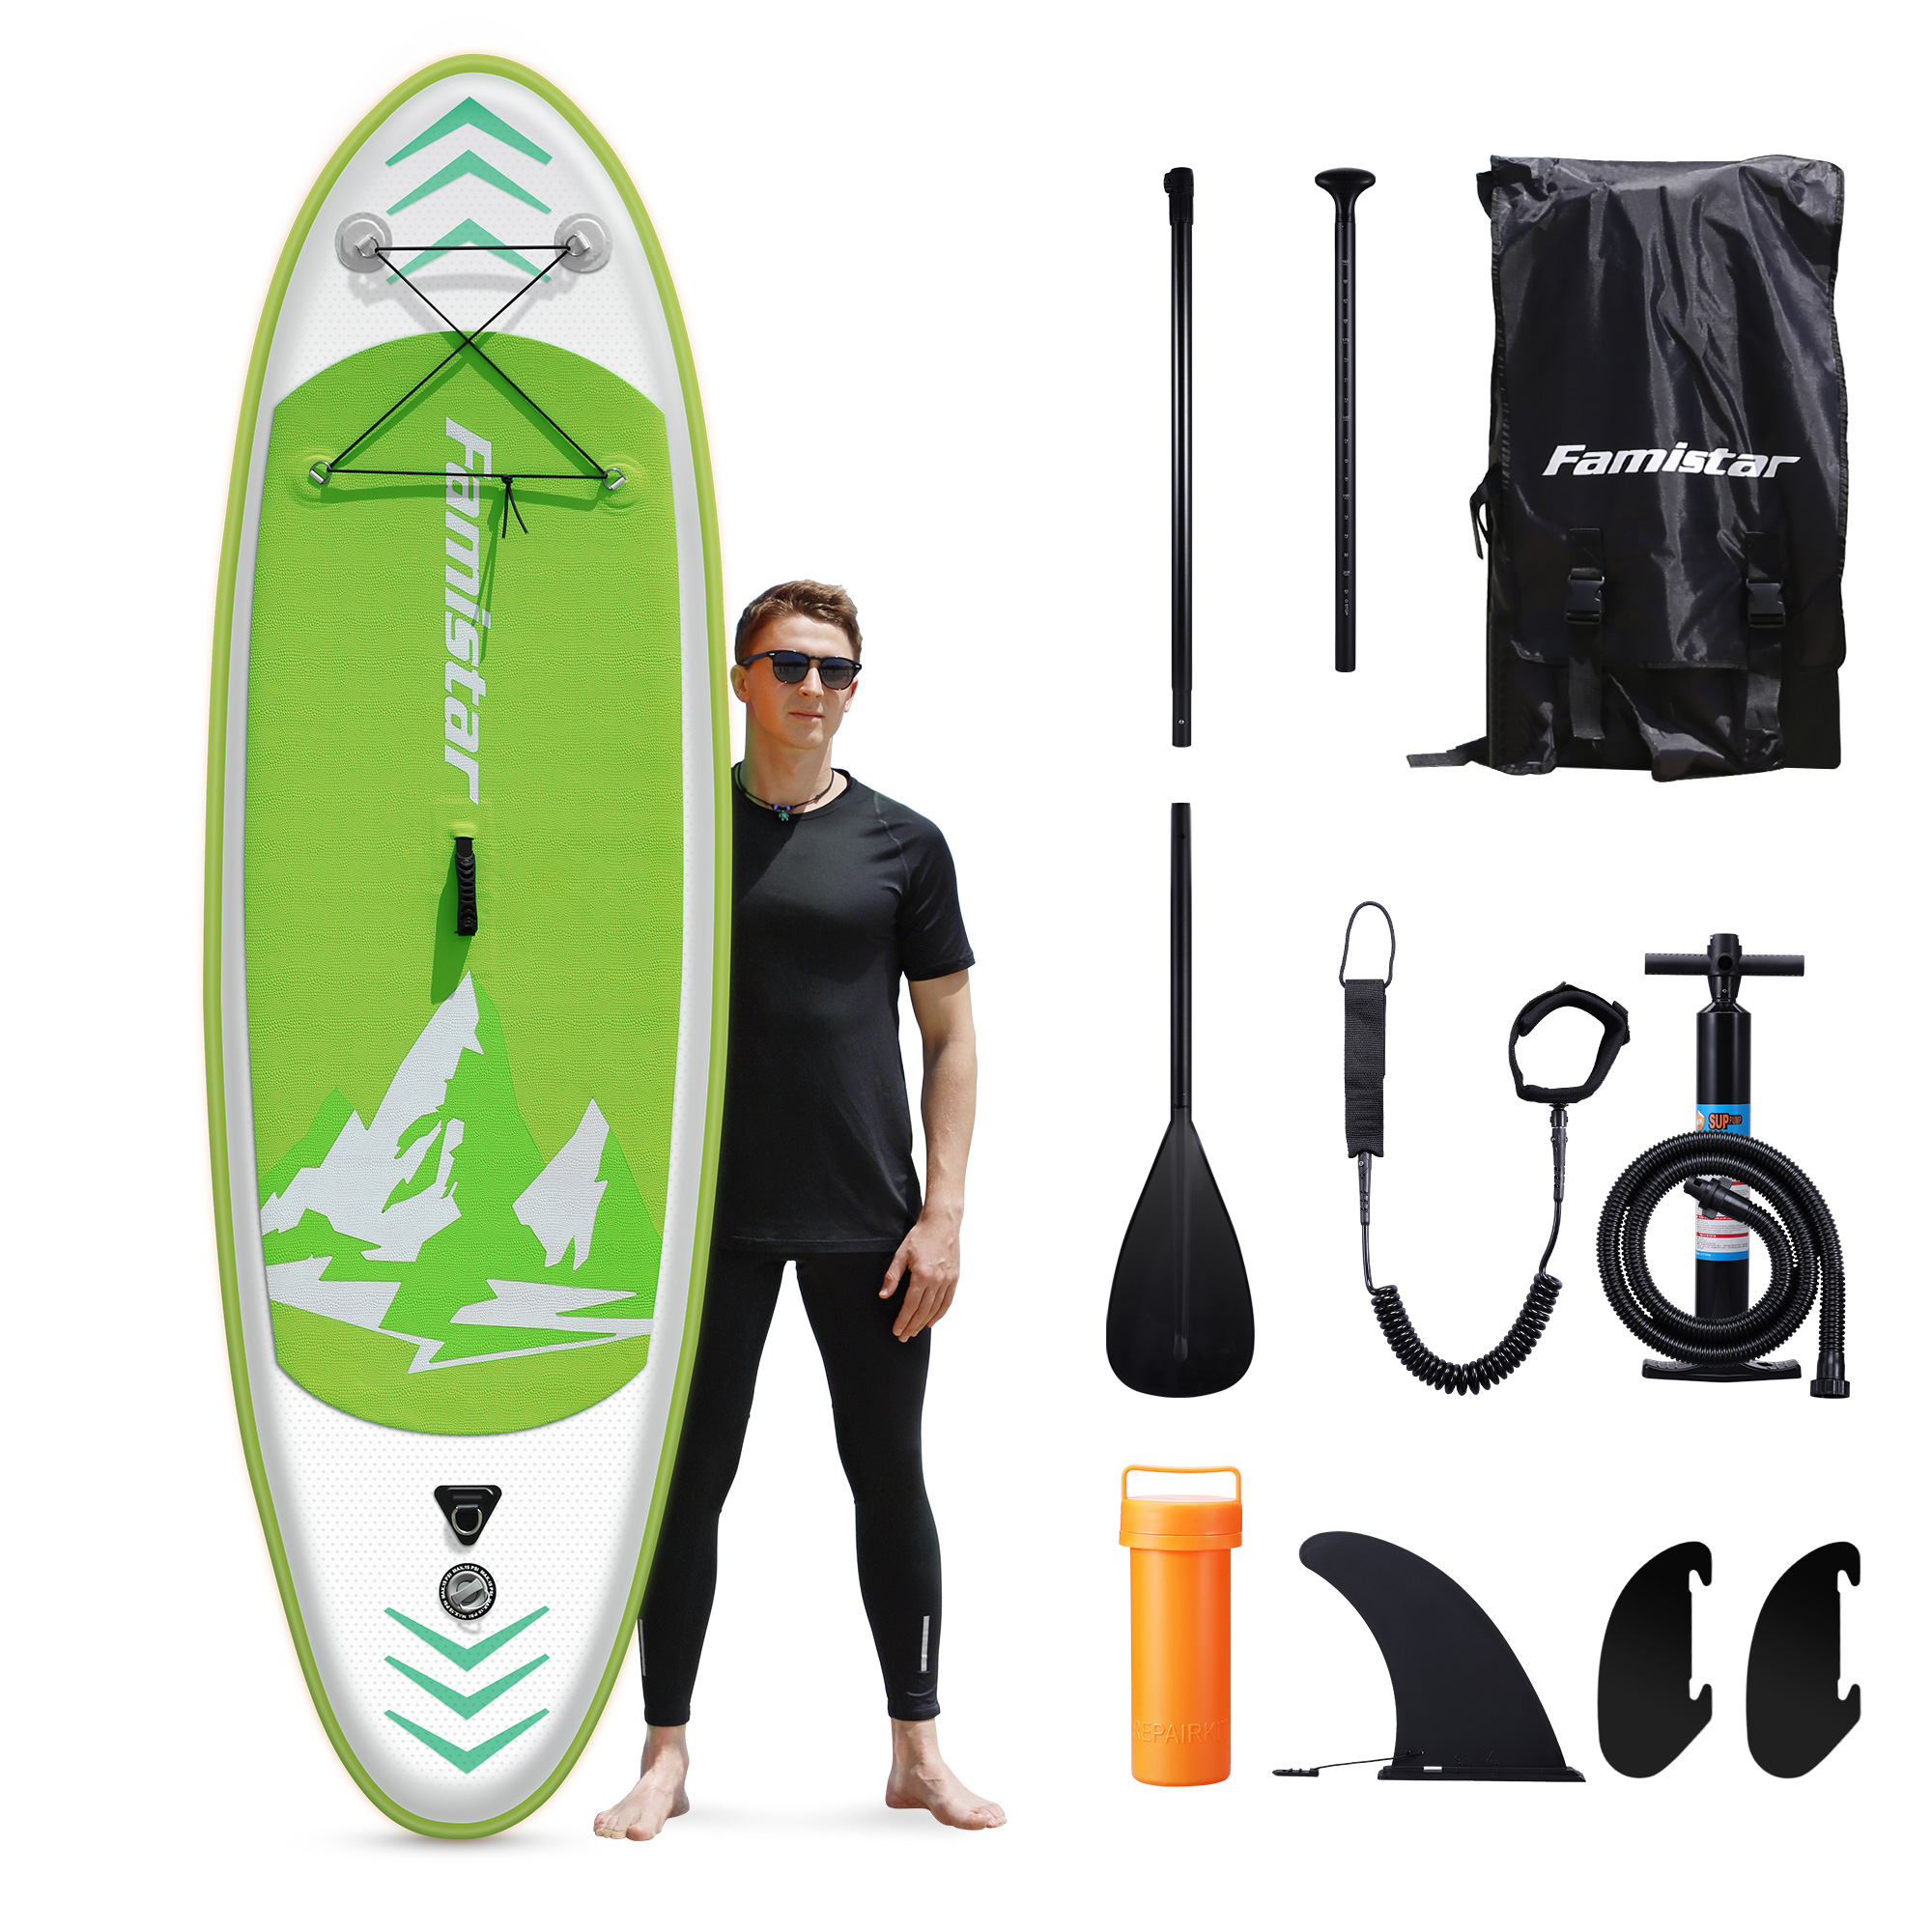 Famistar 8'7" Inflatable Stand Up Paddle Board SUP w/ 3 Fins, Adjustable Paddle, Pump & Carrying Backpack - image 1 of 13